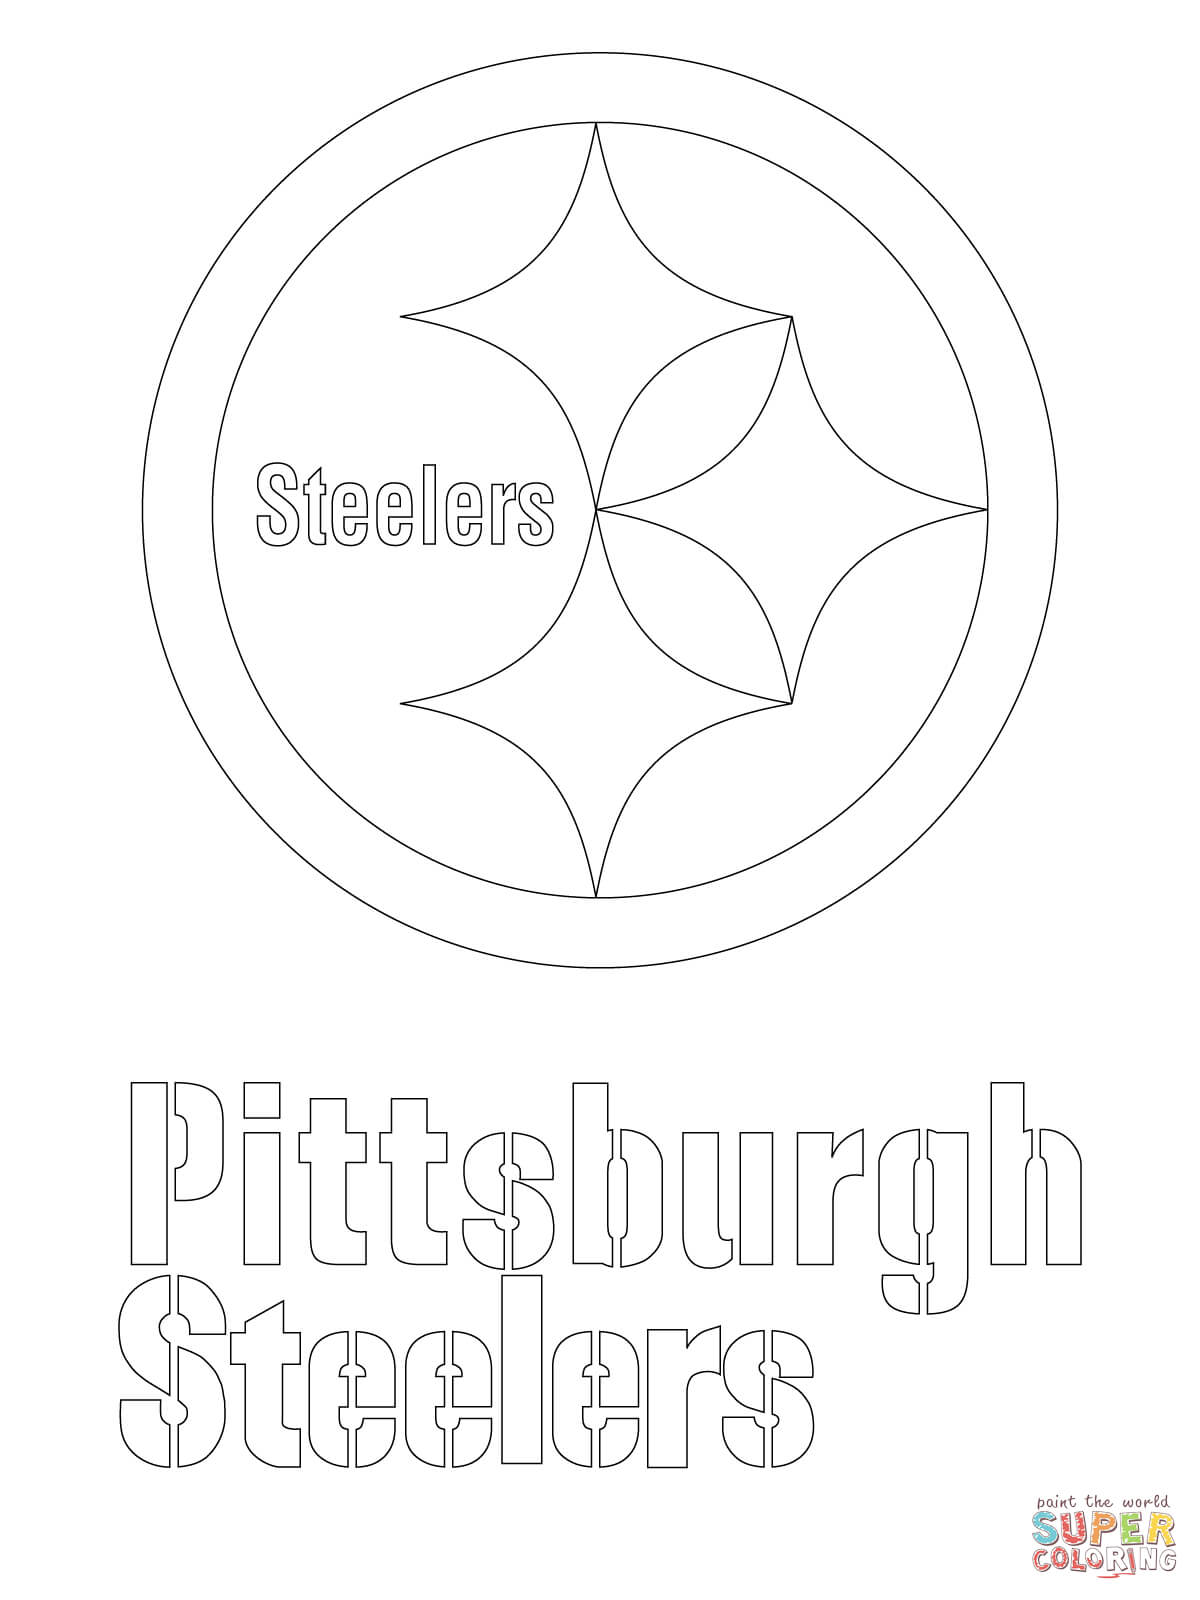 Pittsburgh steelers logo coloring page free printable coloring pages